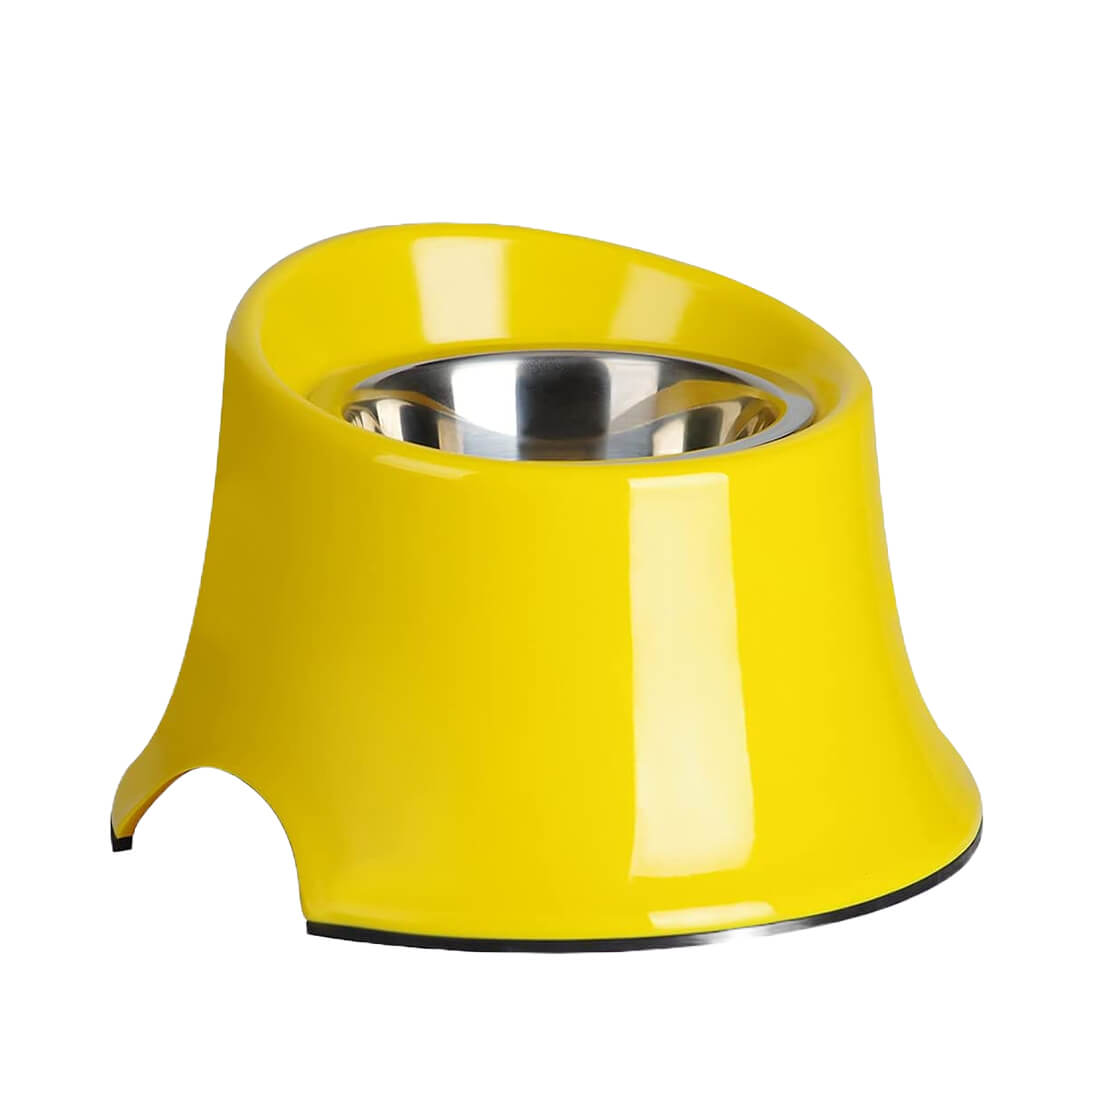 Fithome Dog Water Bowl, Elevated Dog Water Bowls for Large Dogs